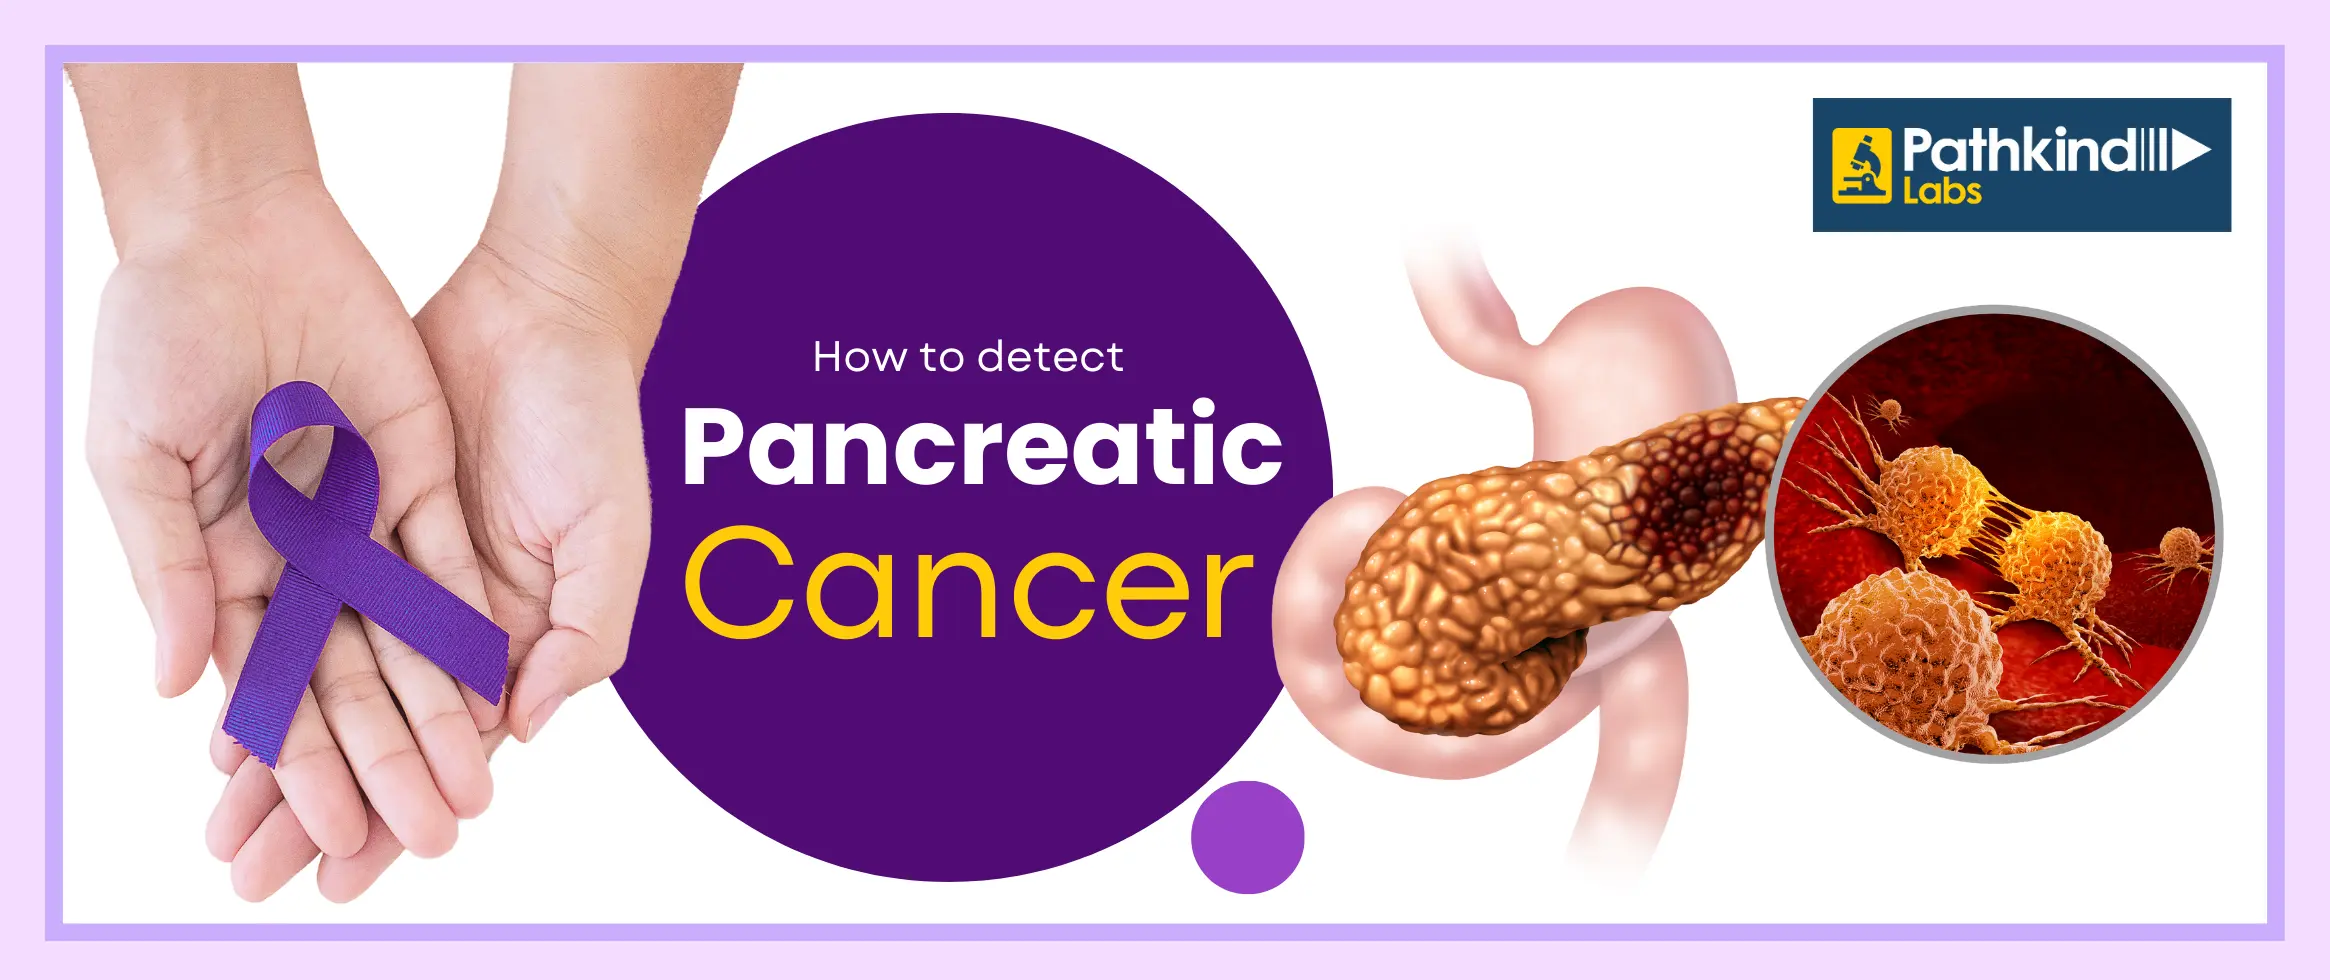 Pancreatic Cancer Month